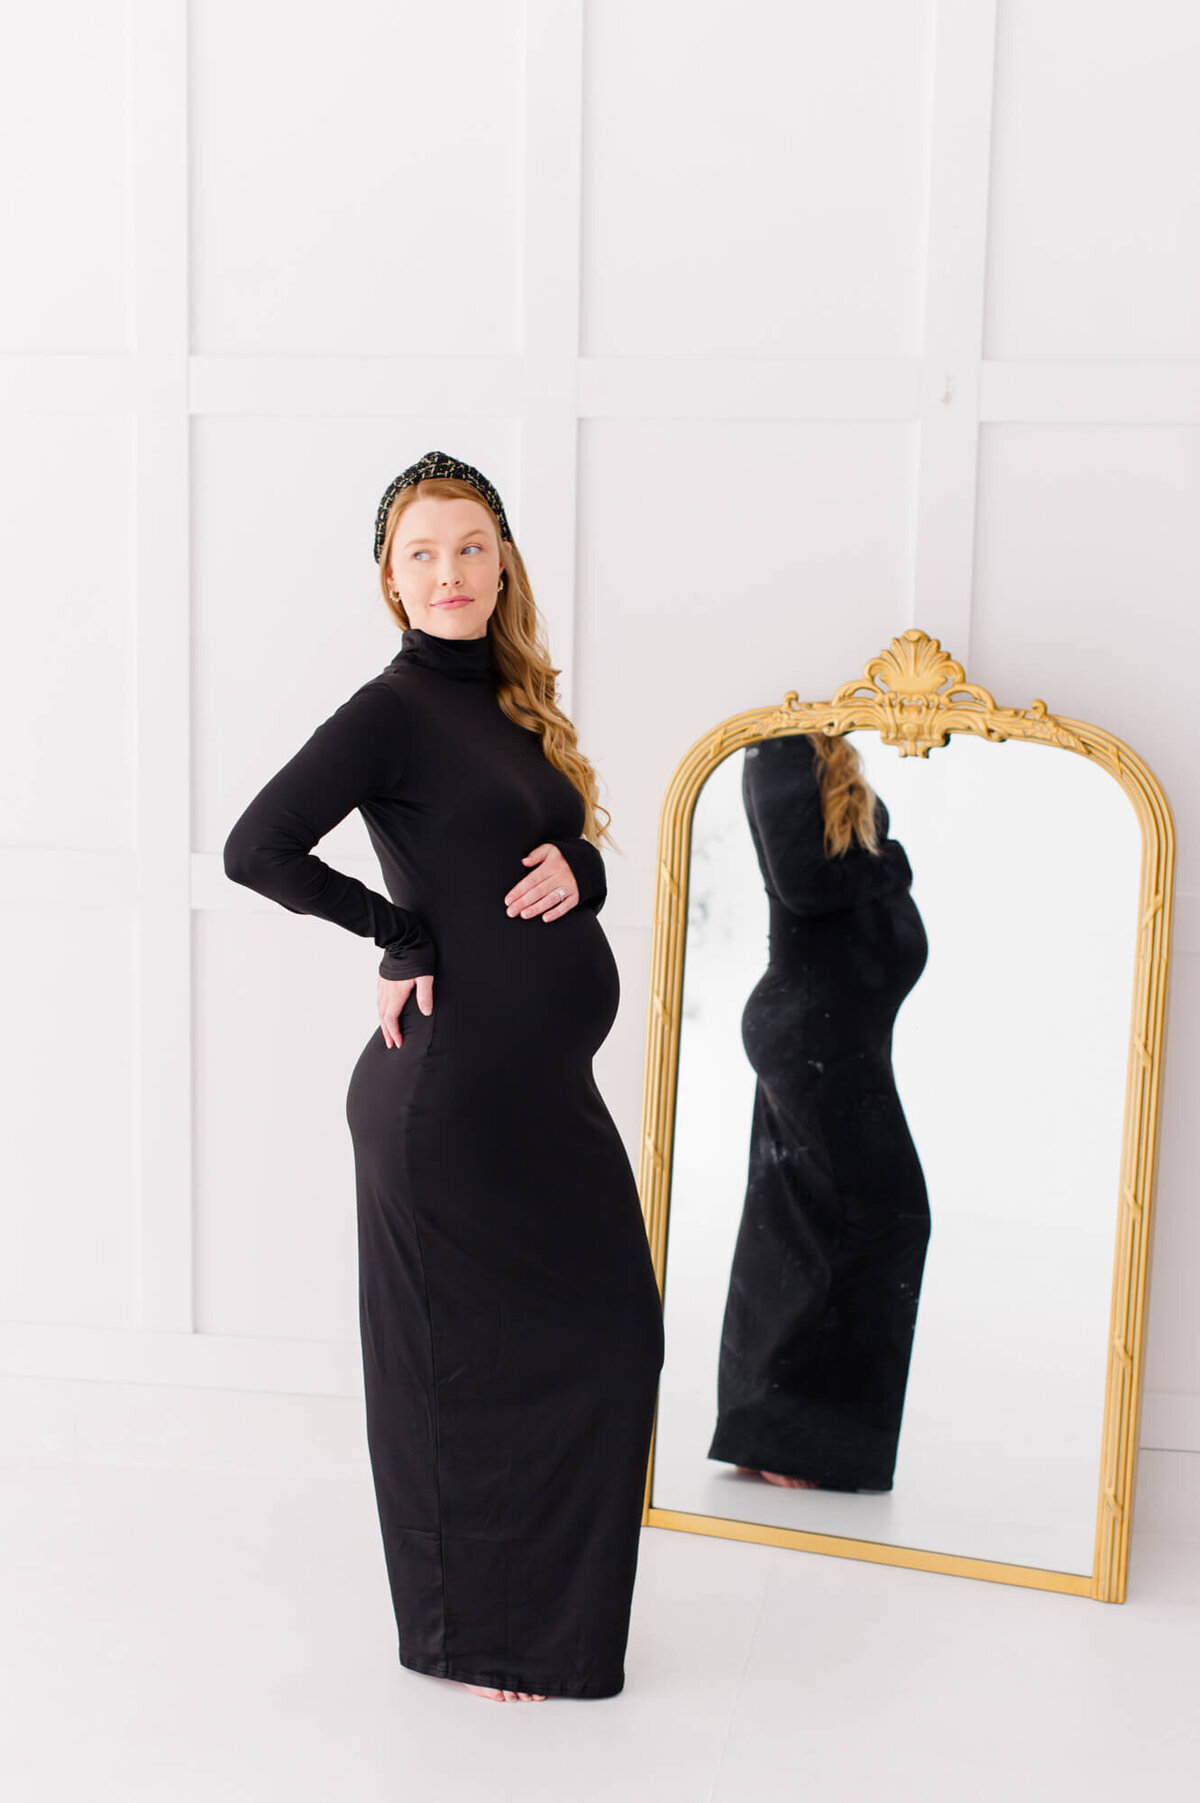 Pregnant mother stands near mirror showing her bump while also smiling off in the distance